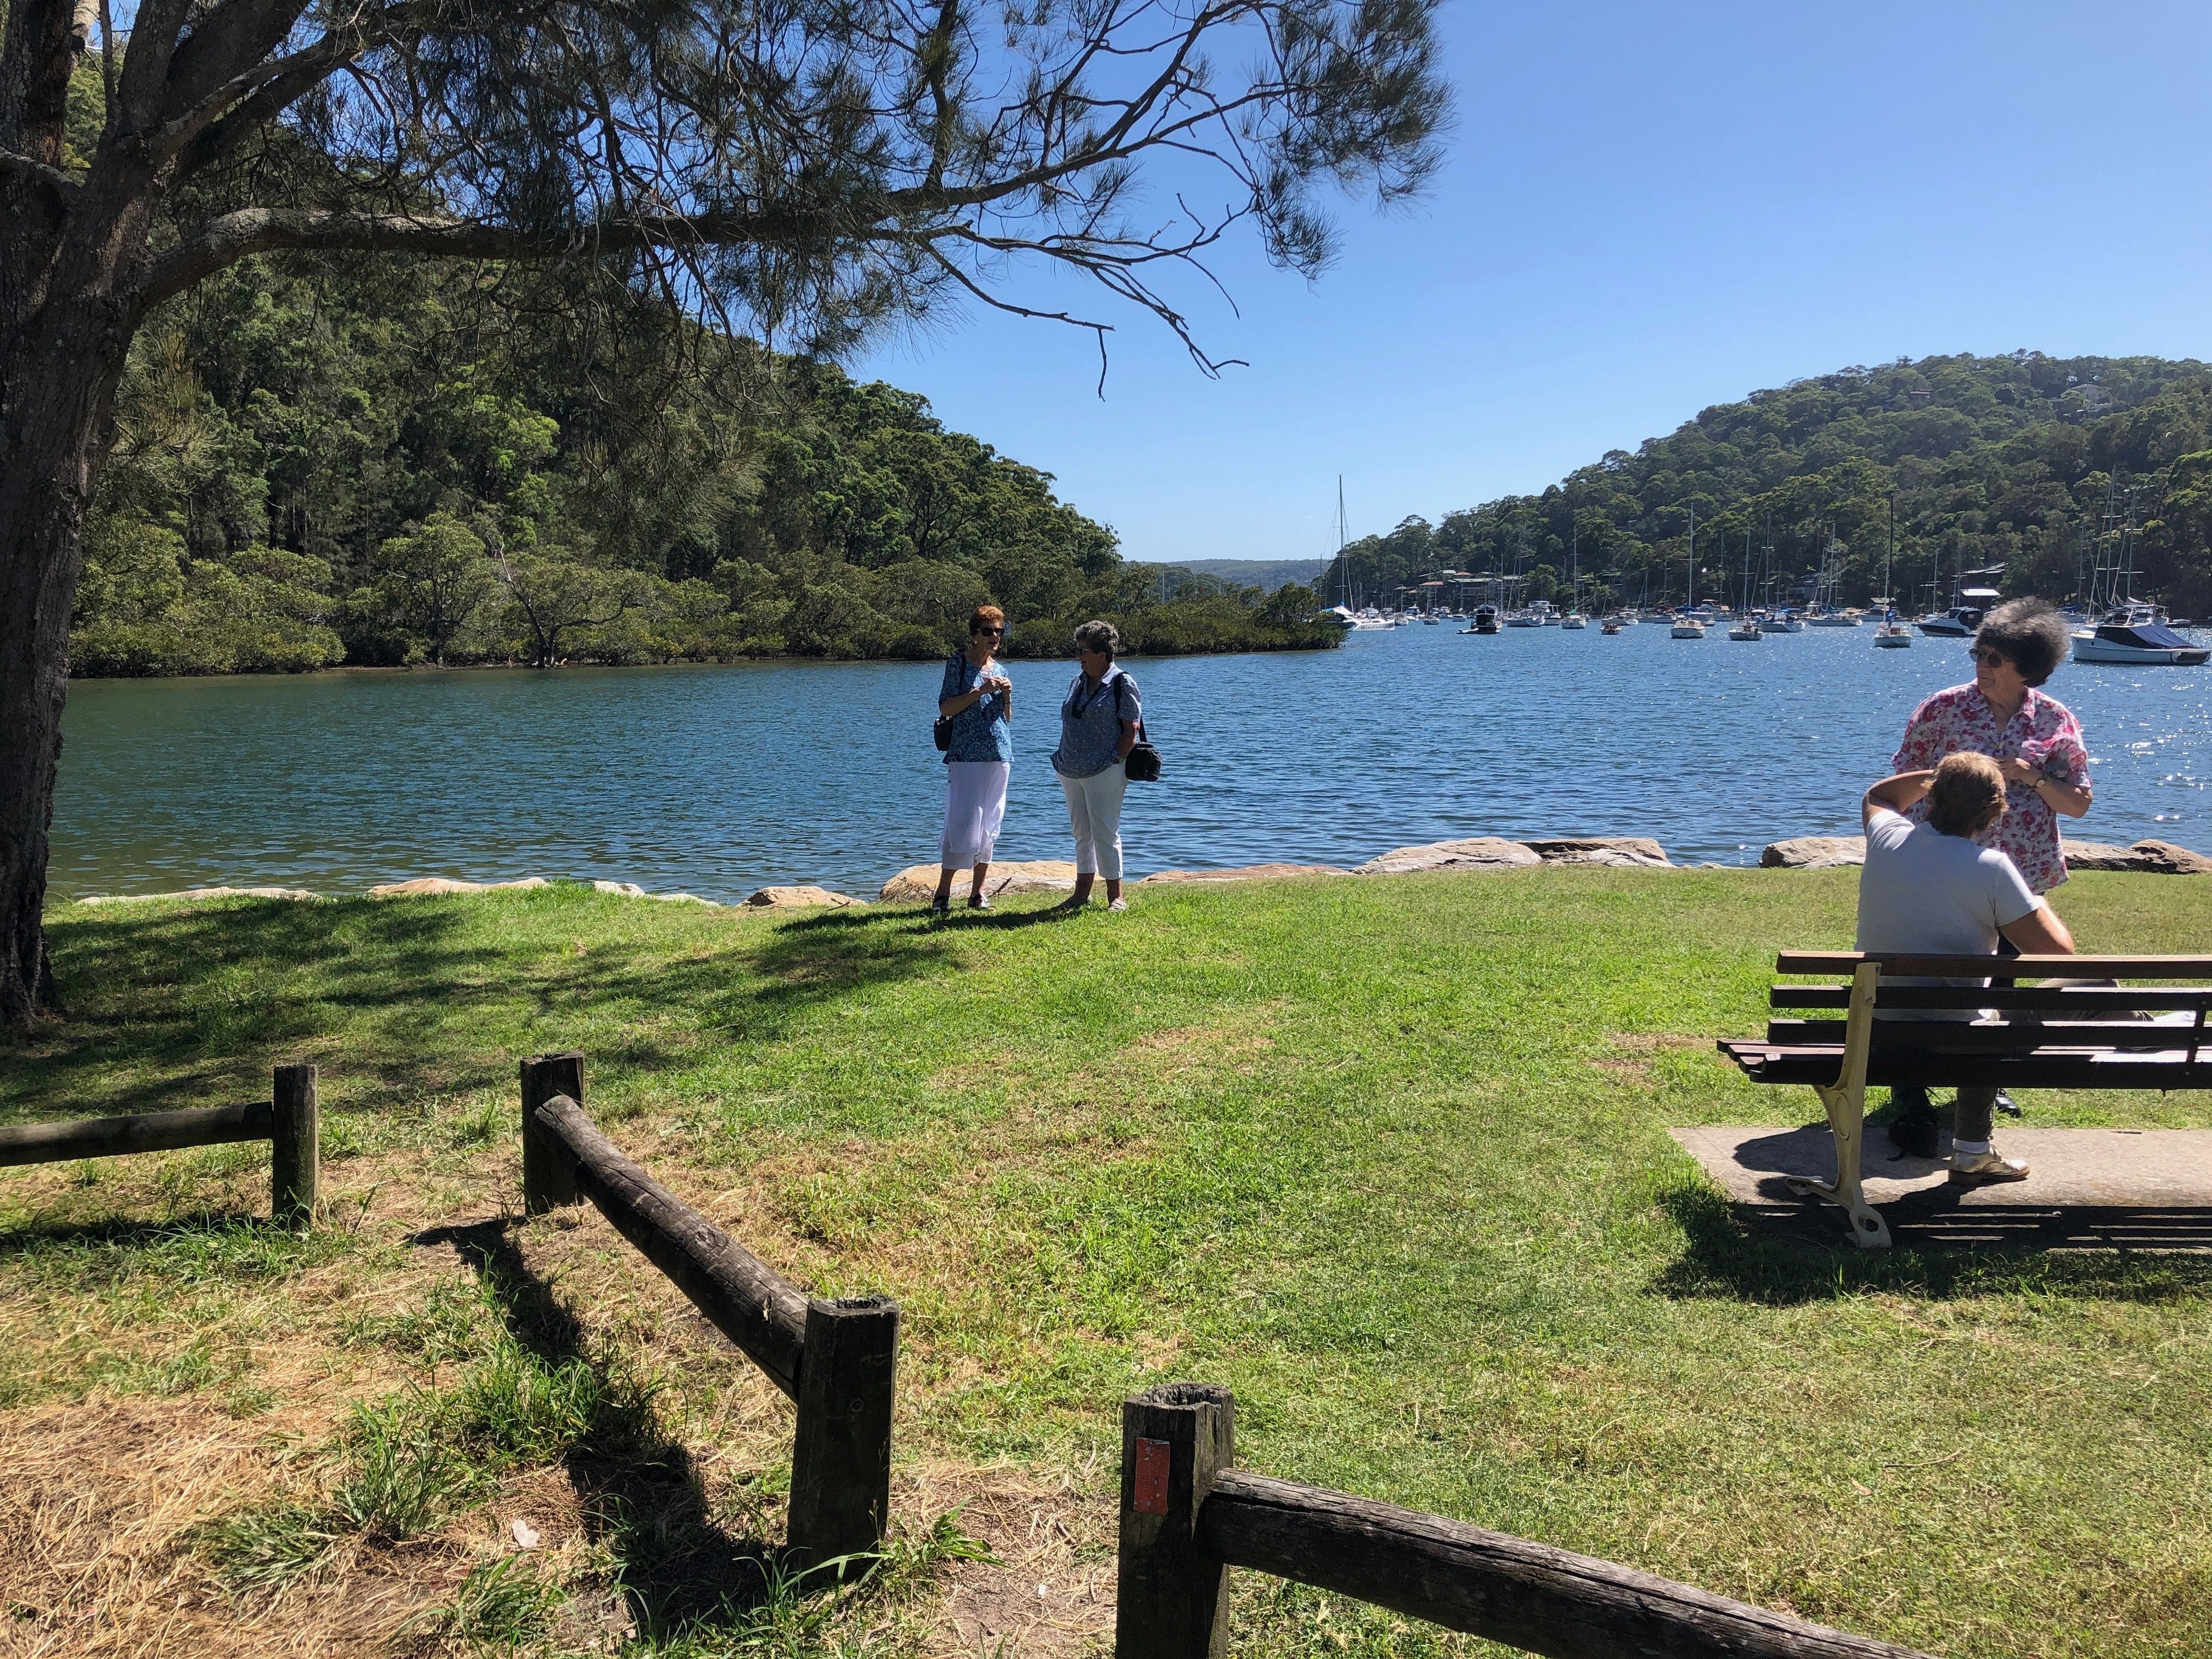 Northern Beaches Public Day Tour febuary 2019 Image -5c649604bc587